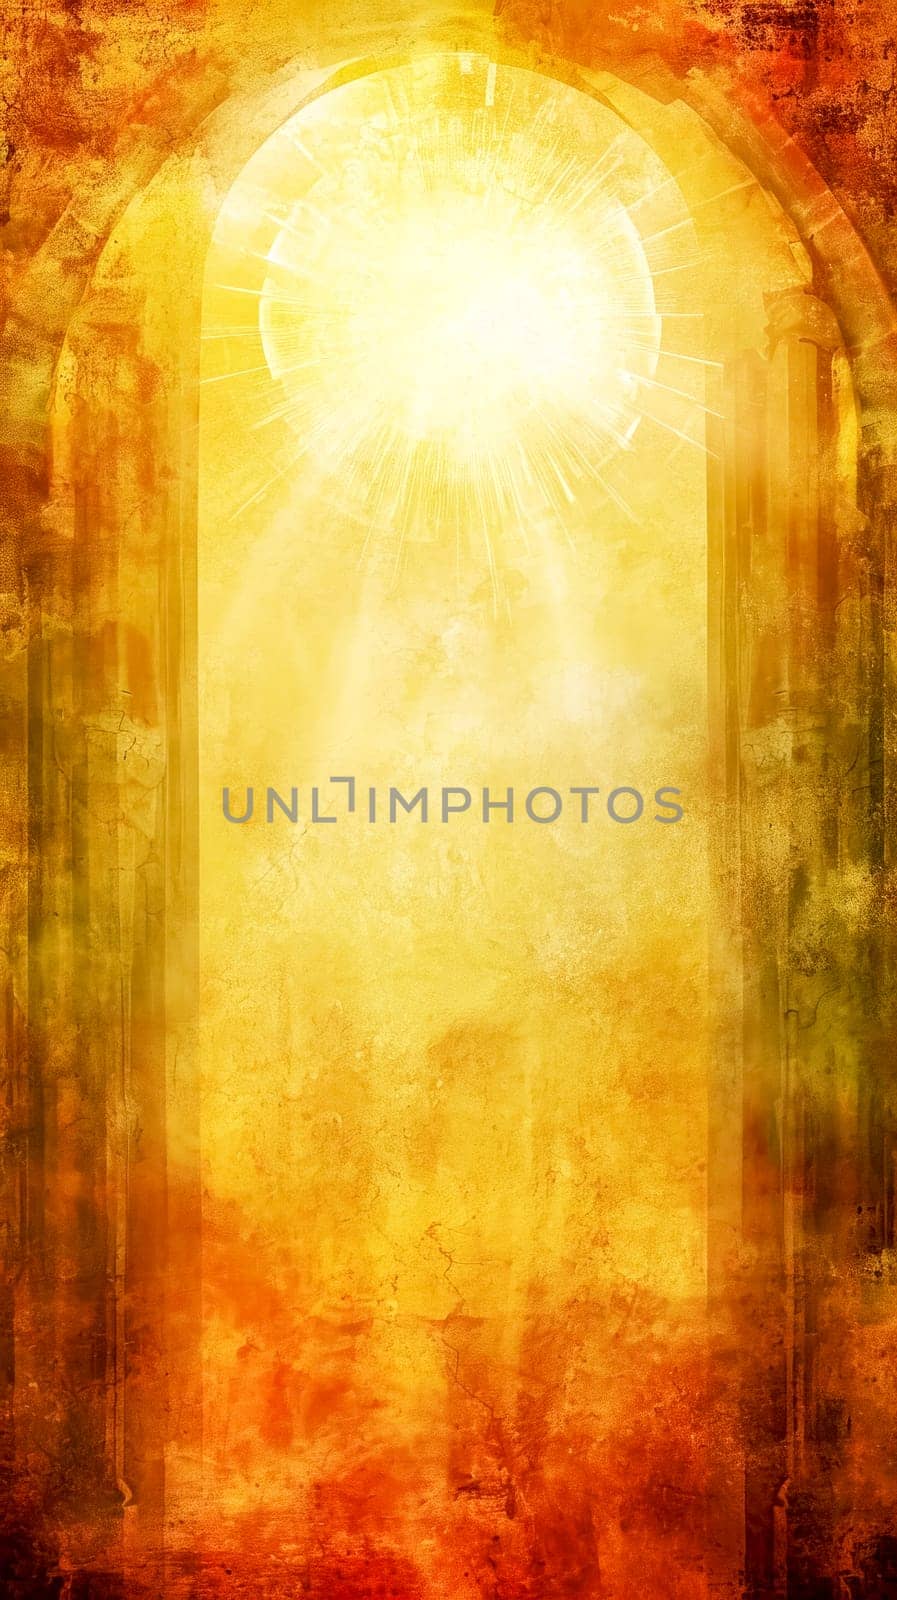 light emanating from an arched doorway, creating an intense and warm glow that symbolizes enlightenment, guidance, passage to the divine, textured golden backdrop, wisdom and spiritual awakening